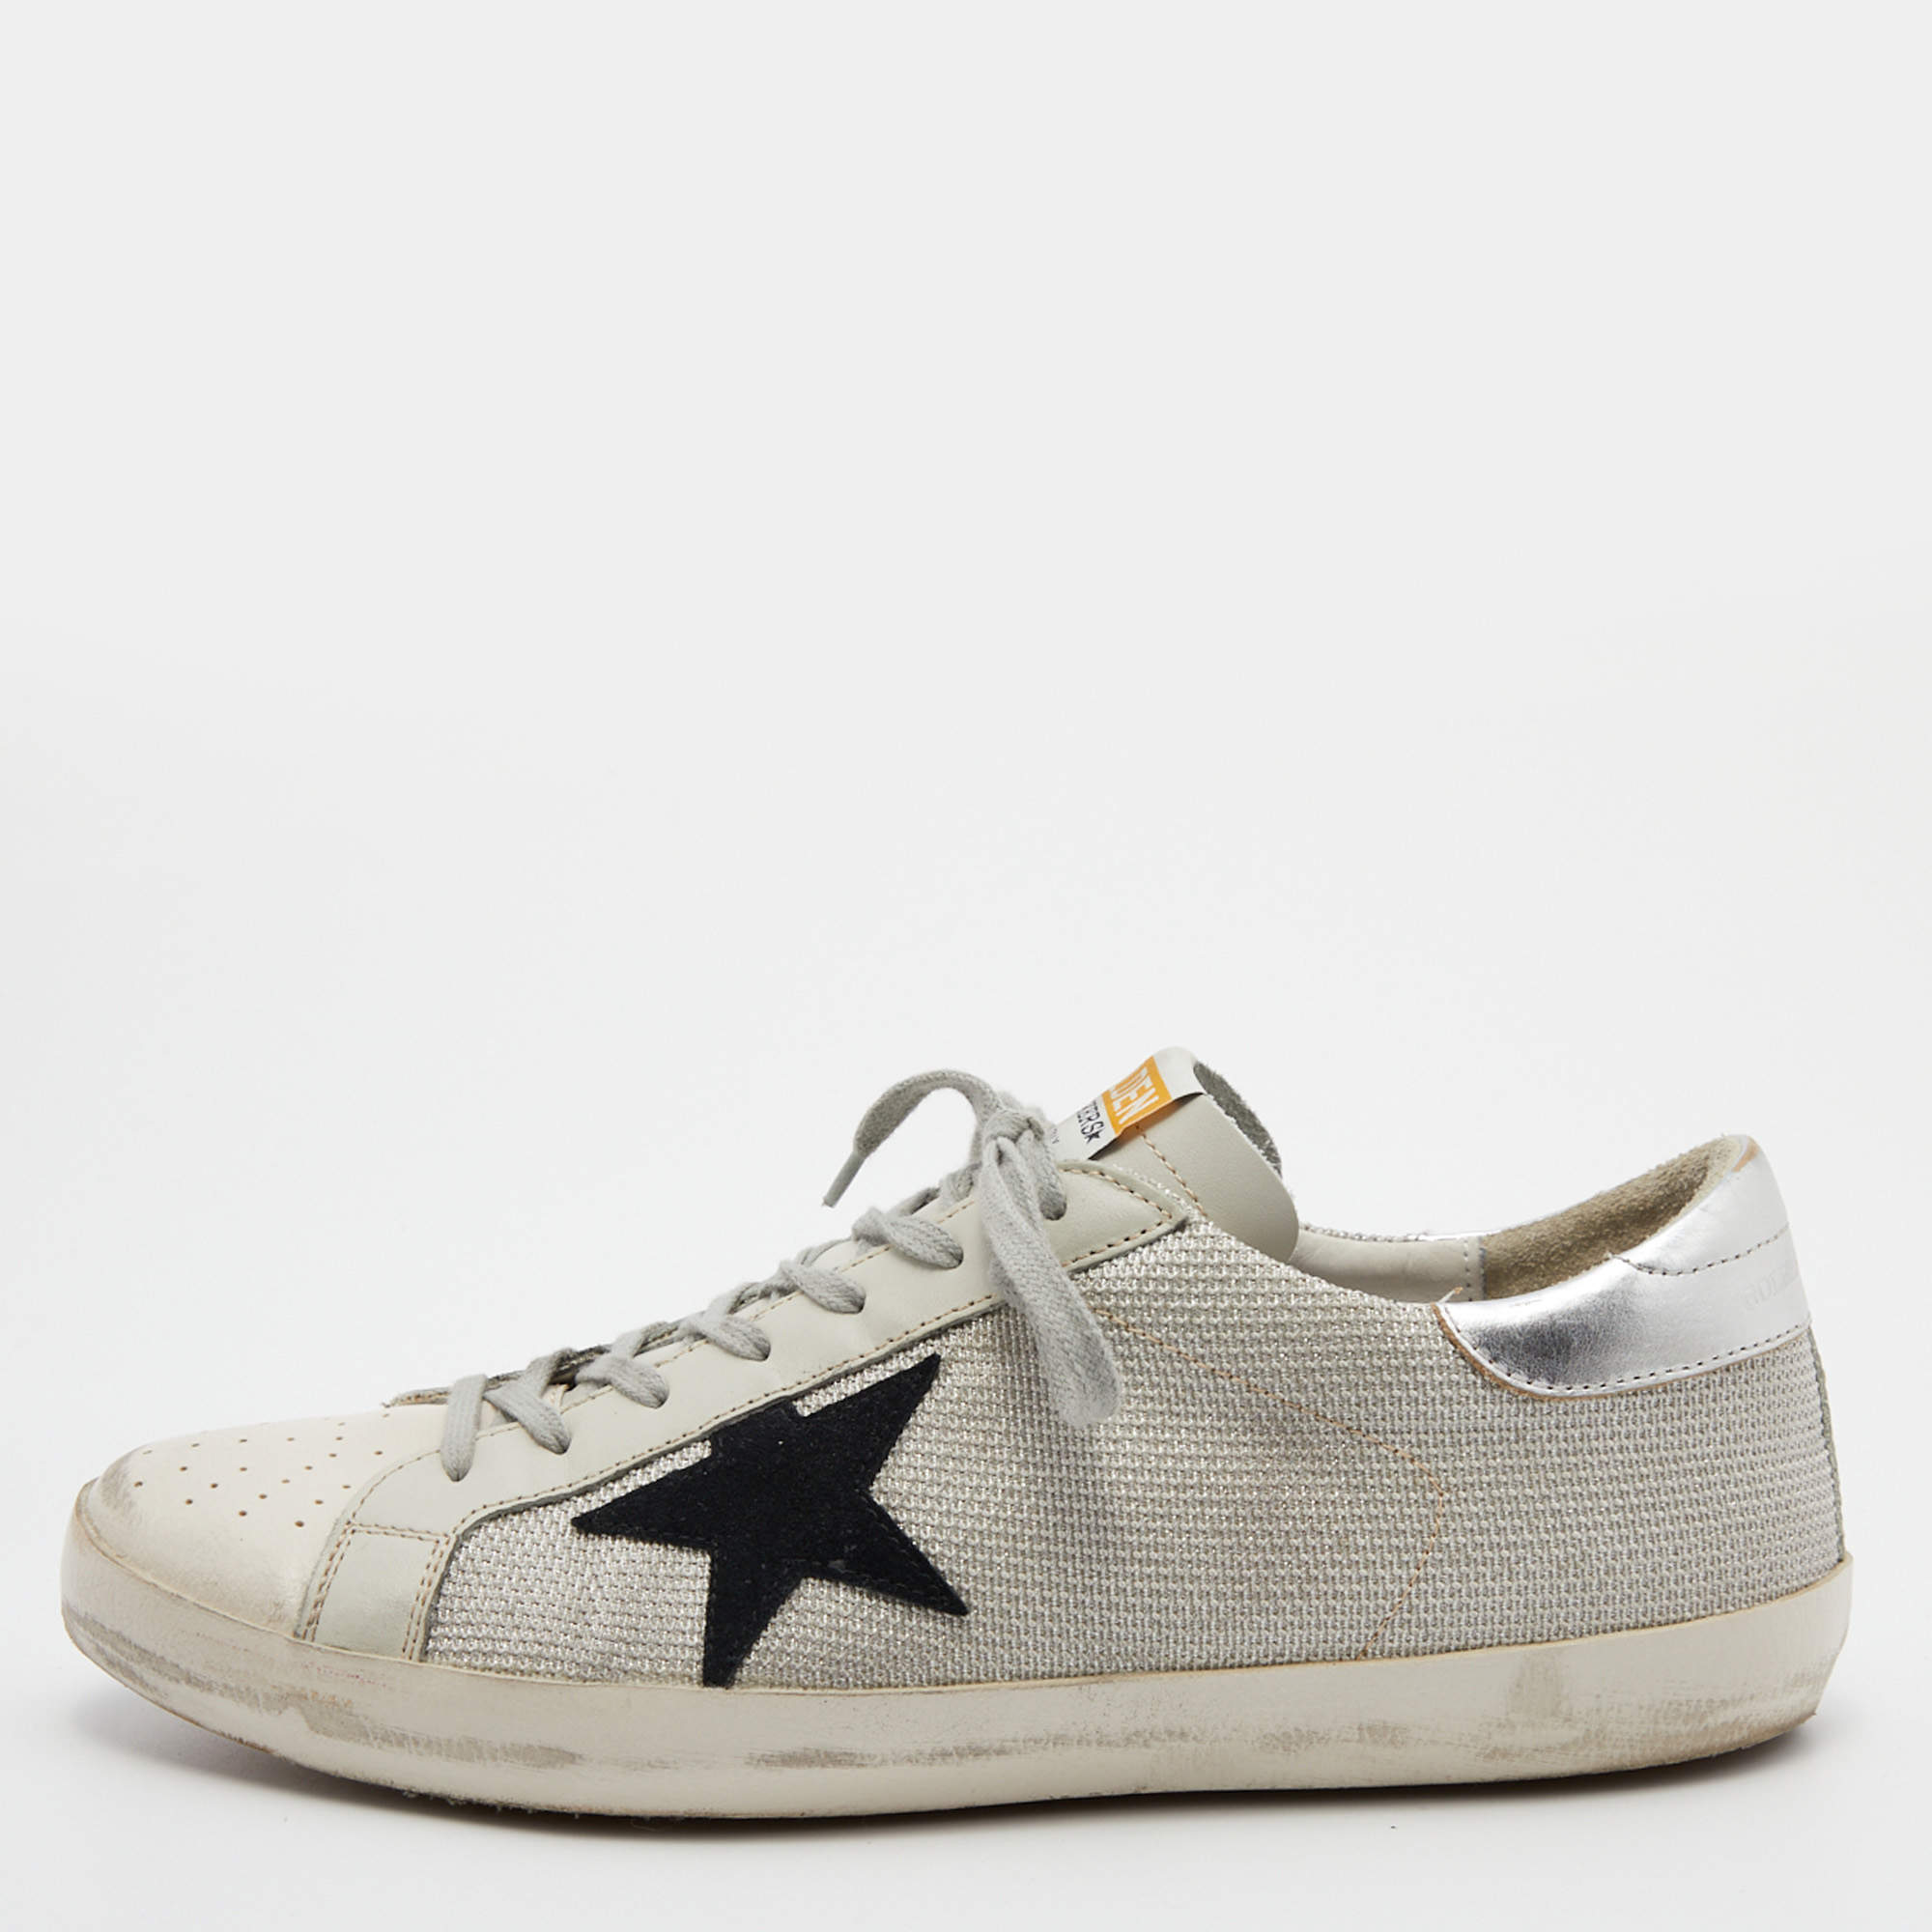 Golden Goose Multicolor Leather and Mesh Superstar Sneakers Size 45